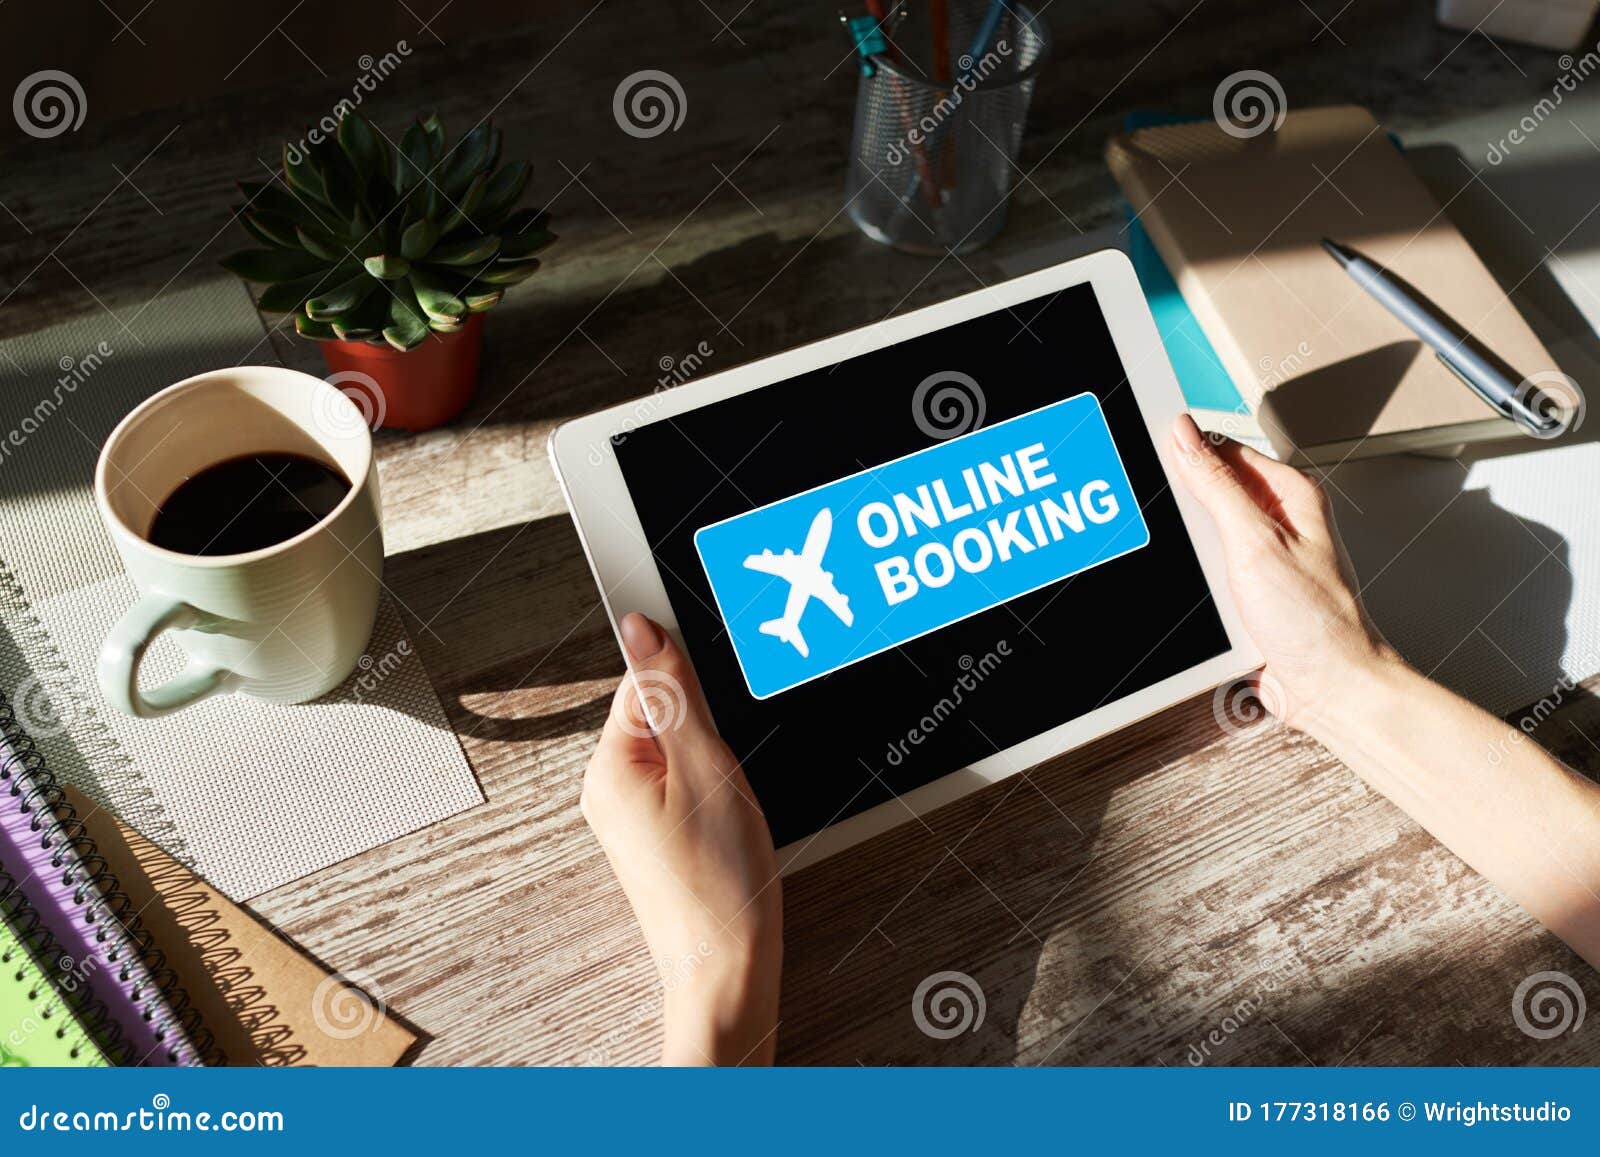 rebooking flight ticket from PGD to SIG by phone